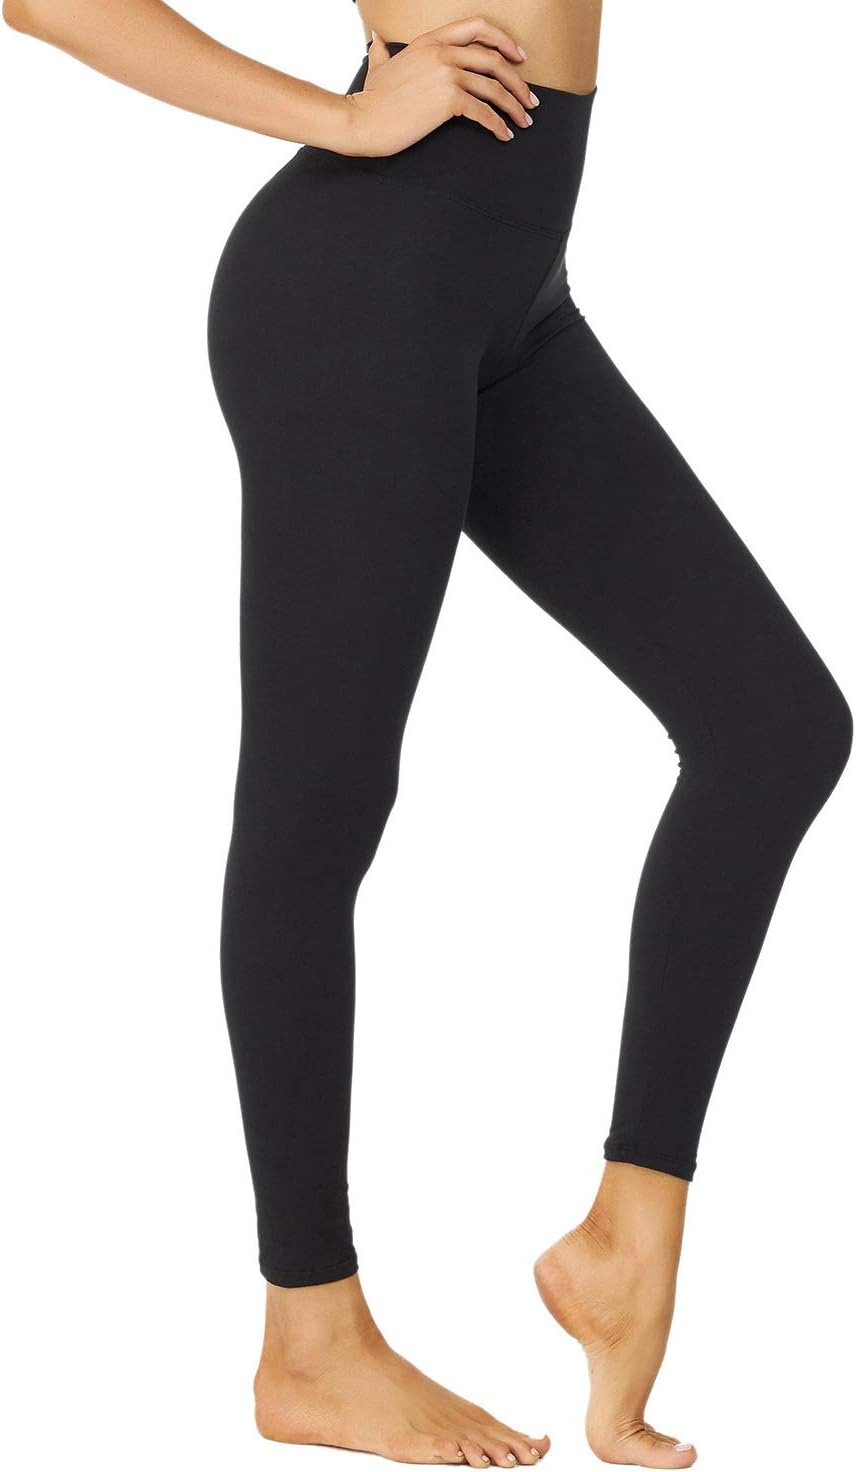 NexiEpoch High Waisted Leggings for Women - Black Tummy Control Compression Soft Yoga Pants for Workout Reg  Plus Size